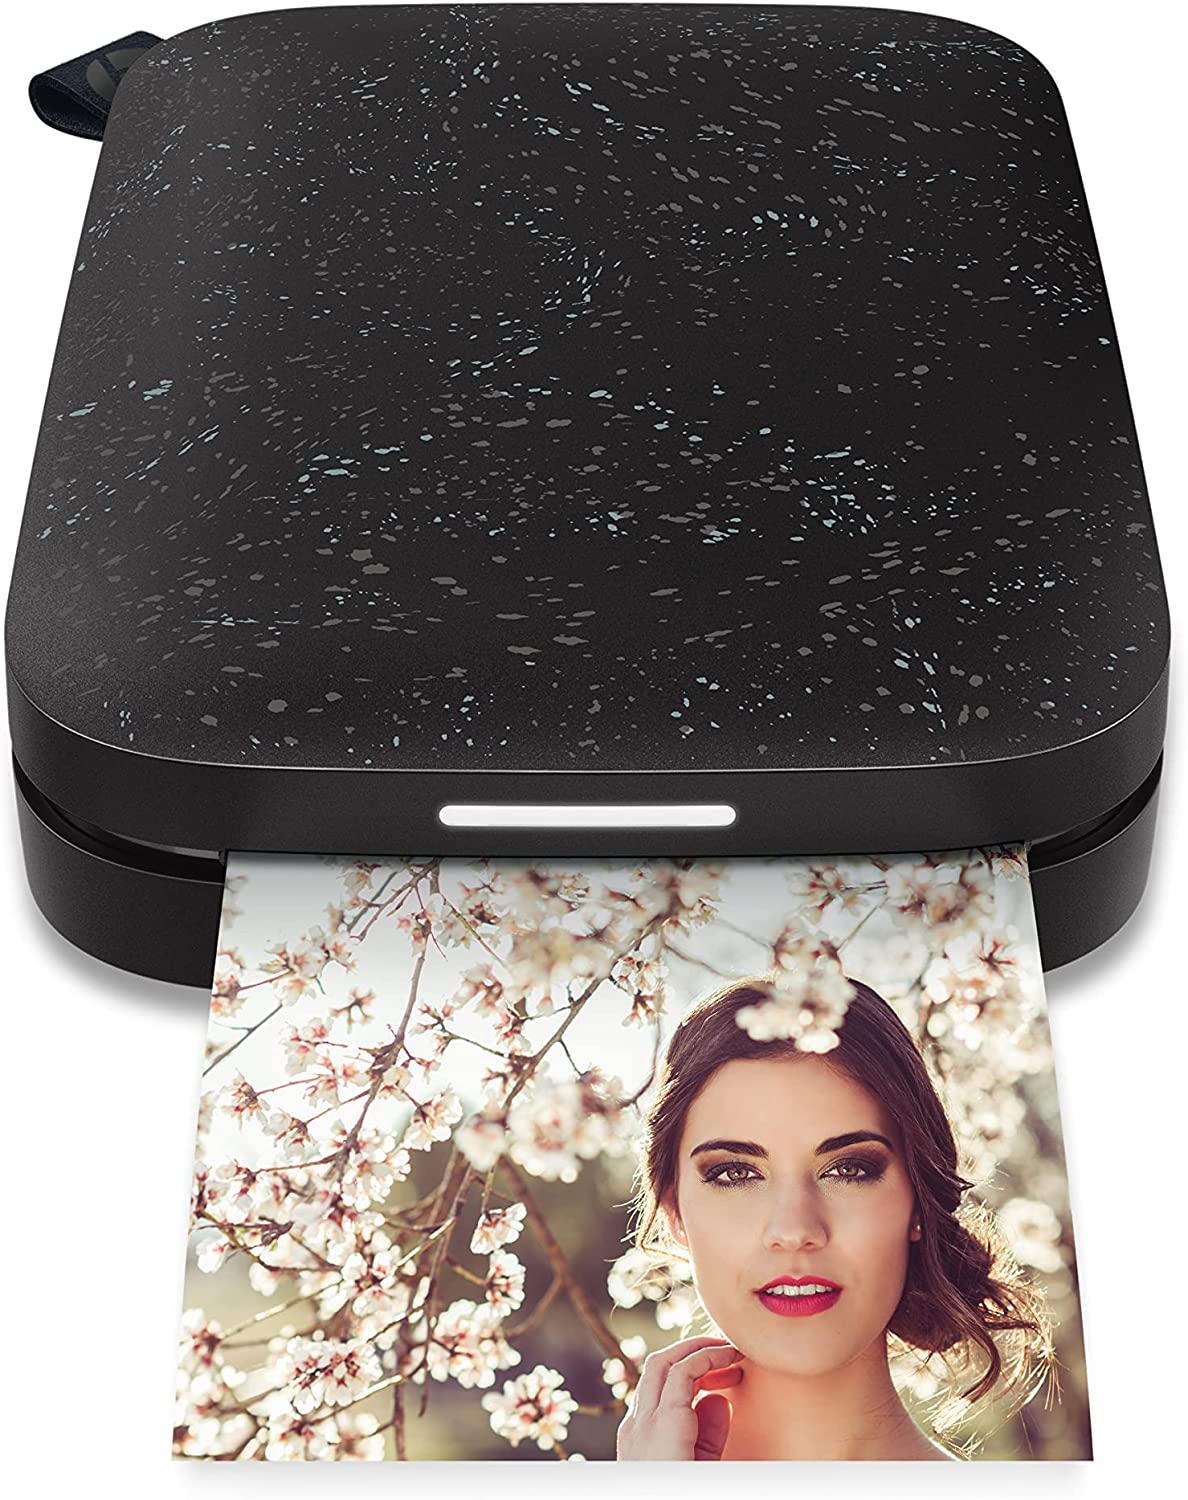 HP Sprocket Portable 2x3 Instant Color Photo Printer (Blush) Print  Pictures on Zink Sticky-Backed Paper from your iOS & Android Device.